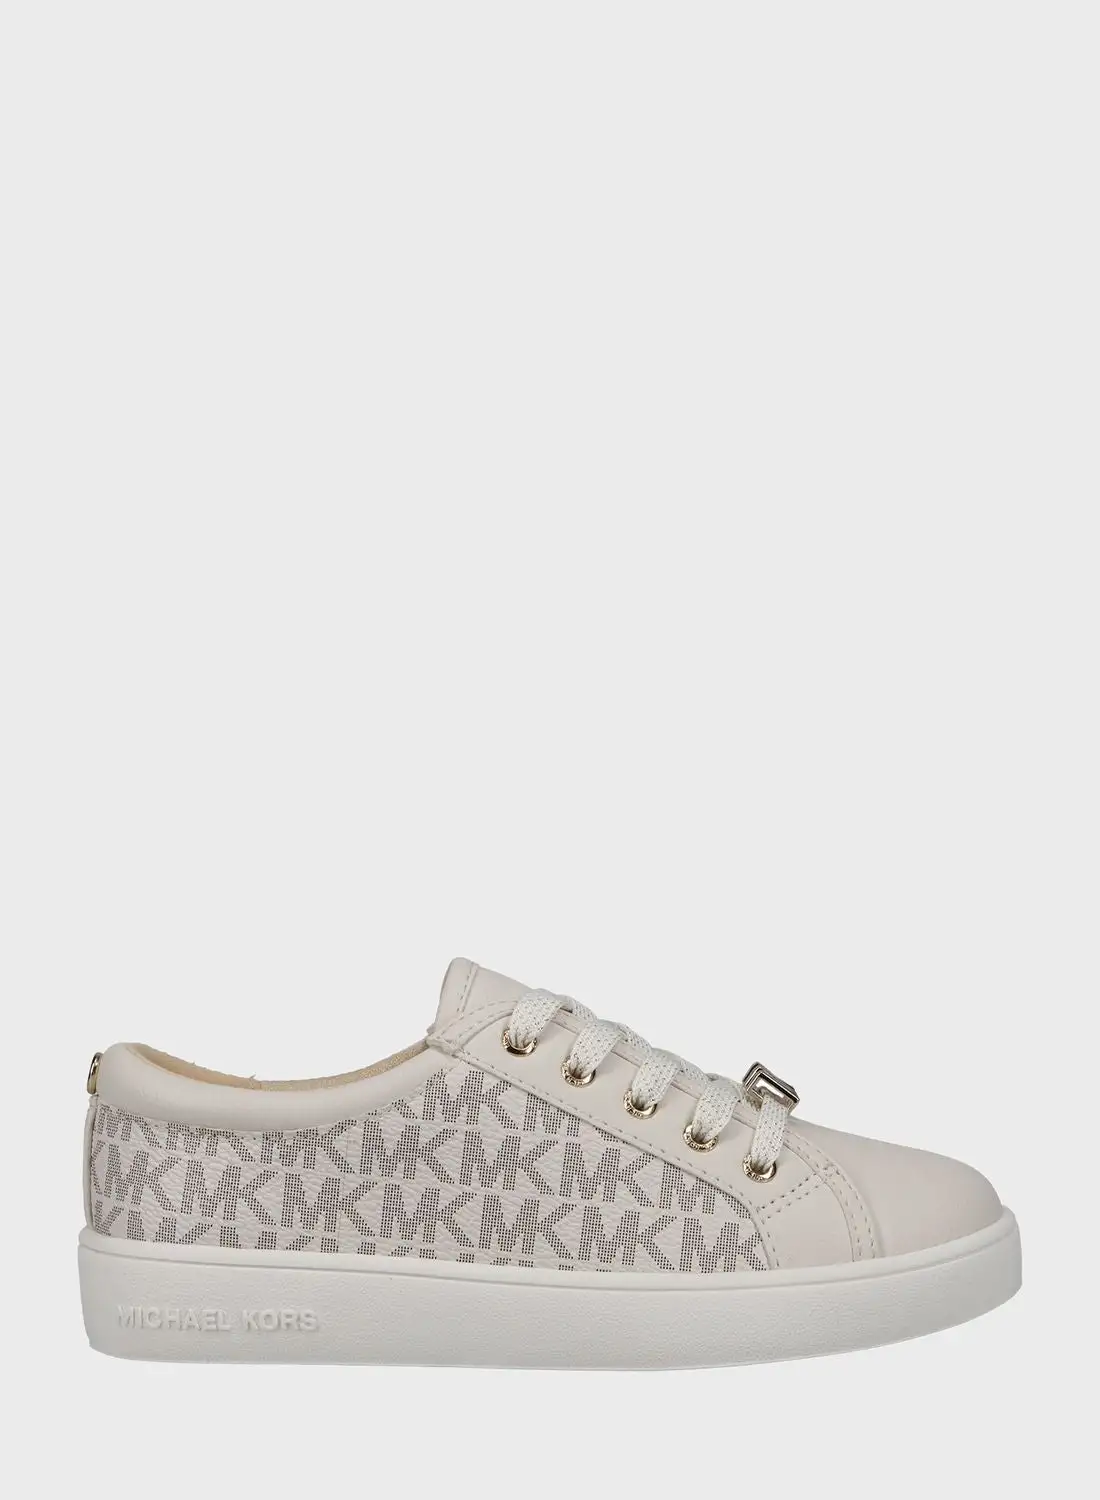 Michael Kors Youth Jem Monogram Low Top Lace Up Sneakers